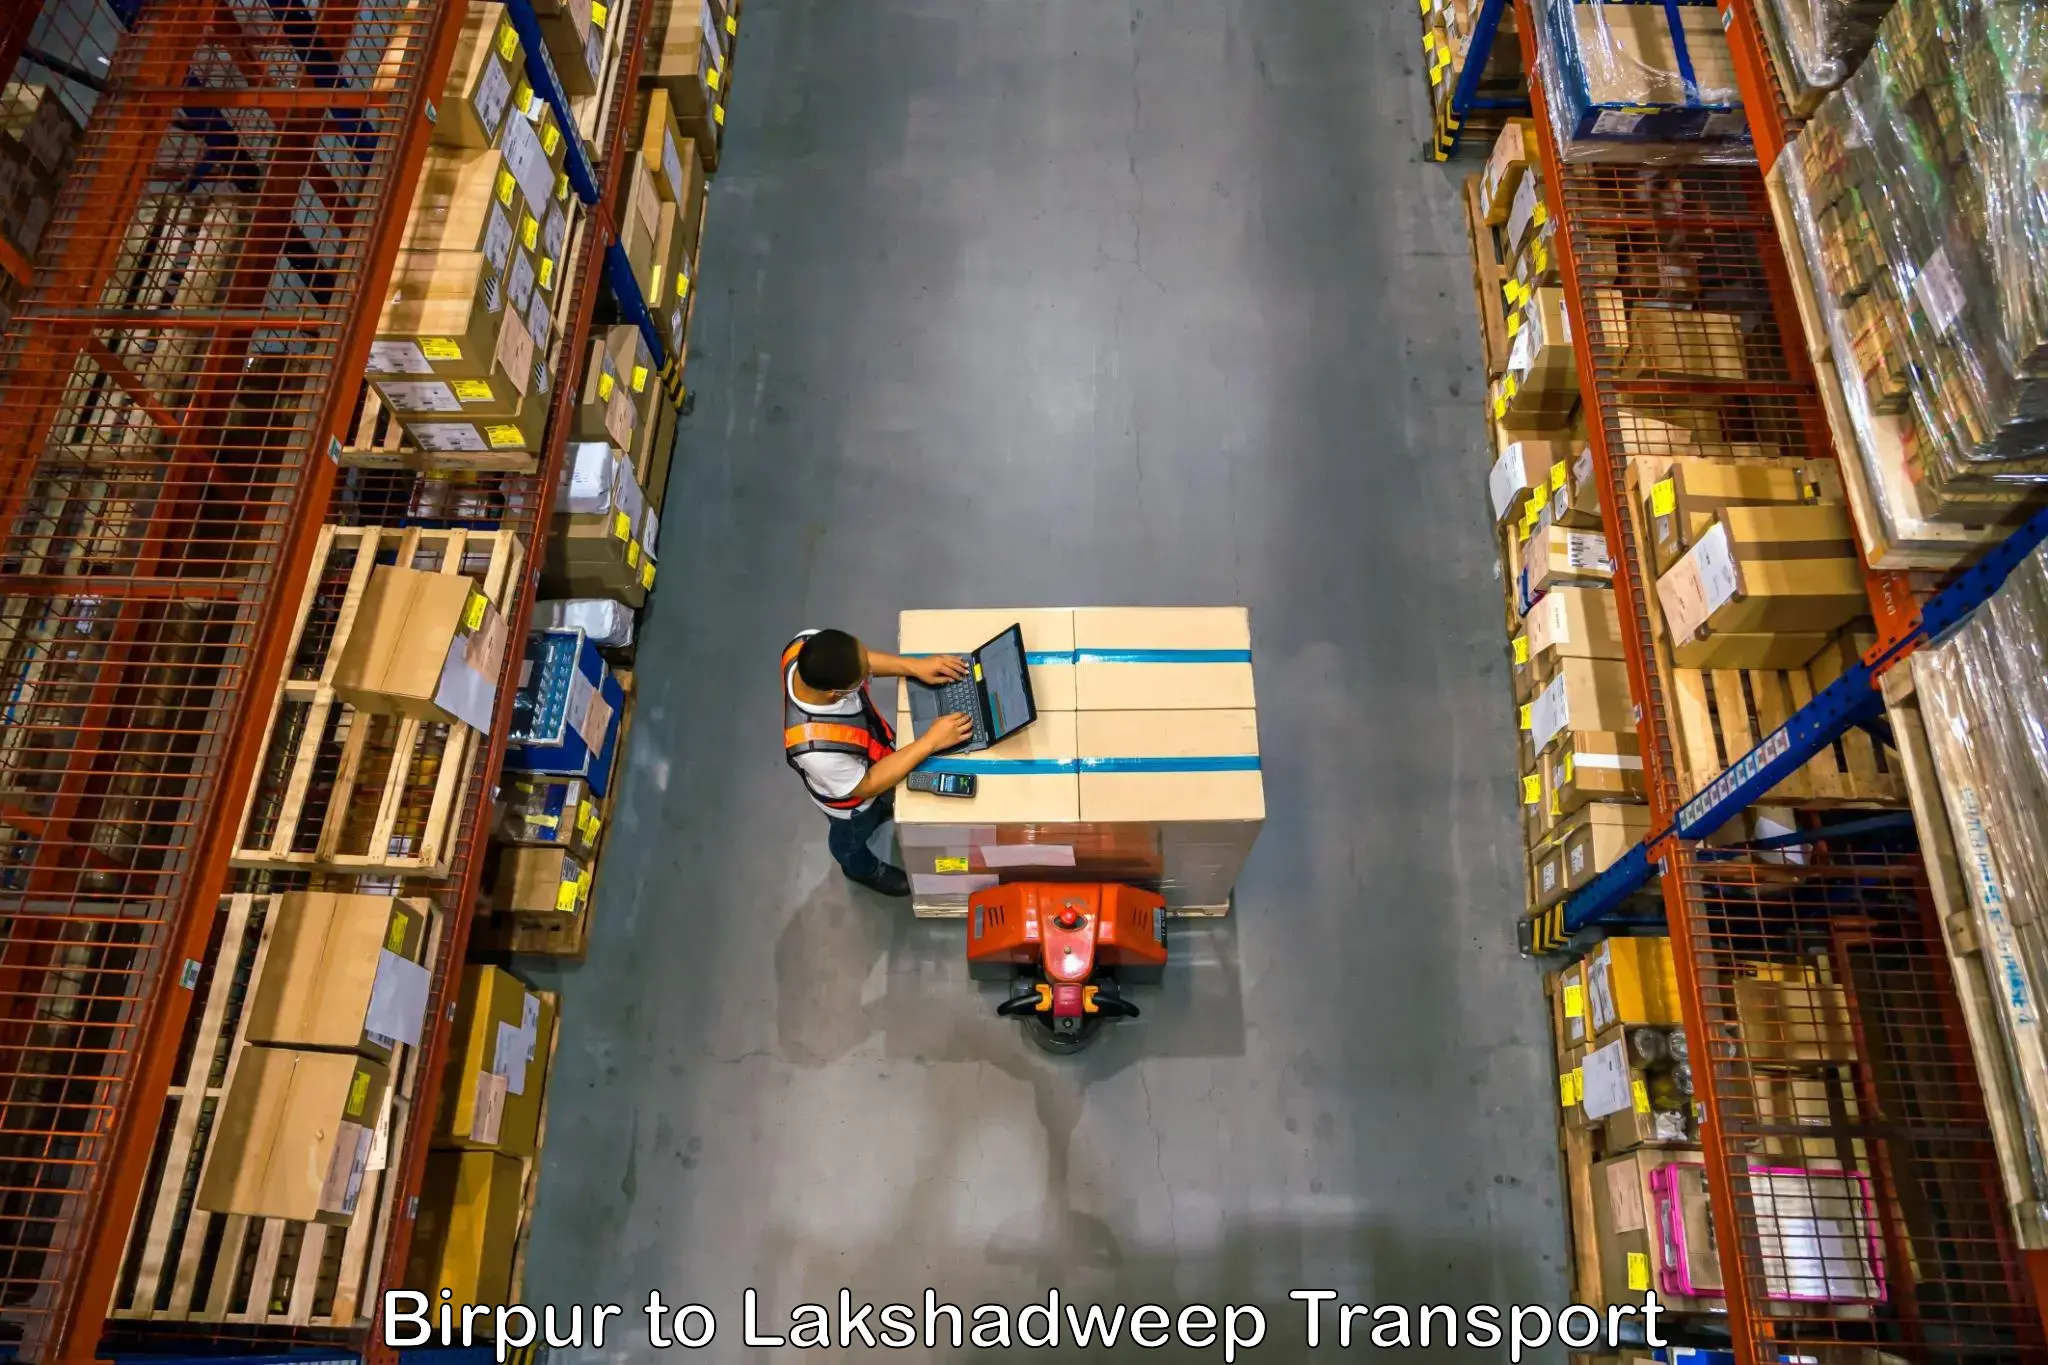 All India transport service Birpur to Lakshadweep